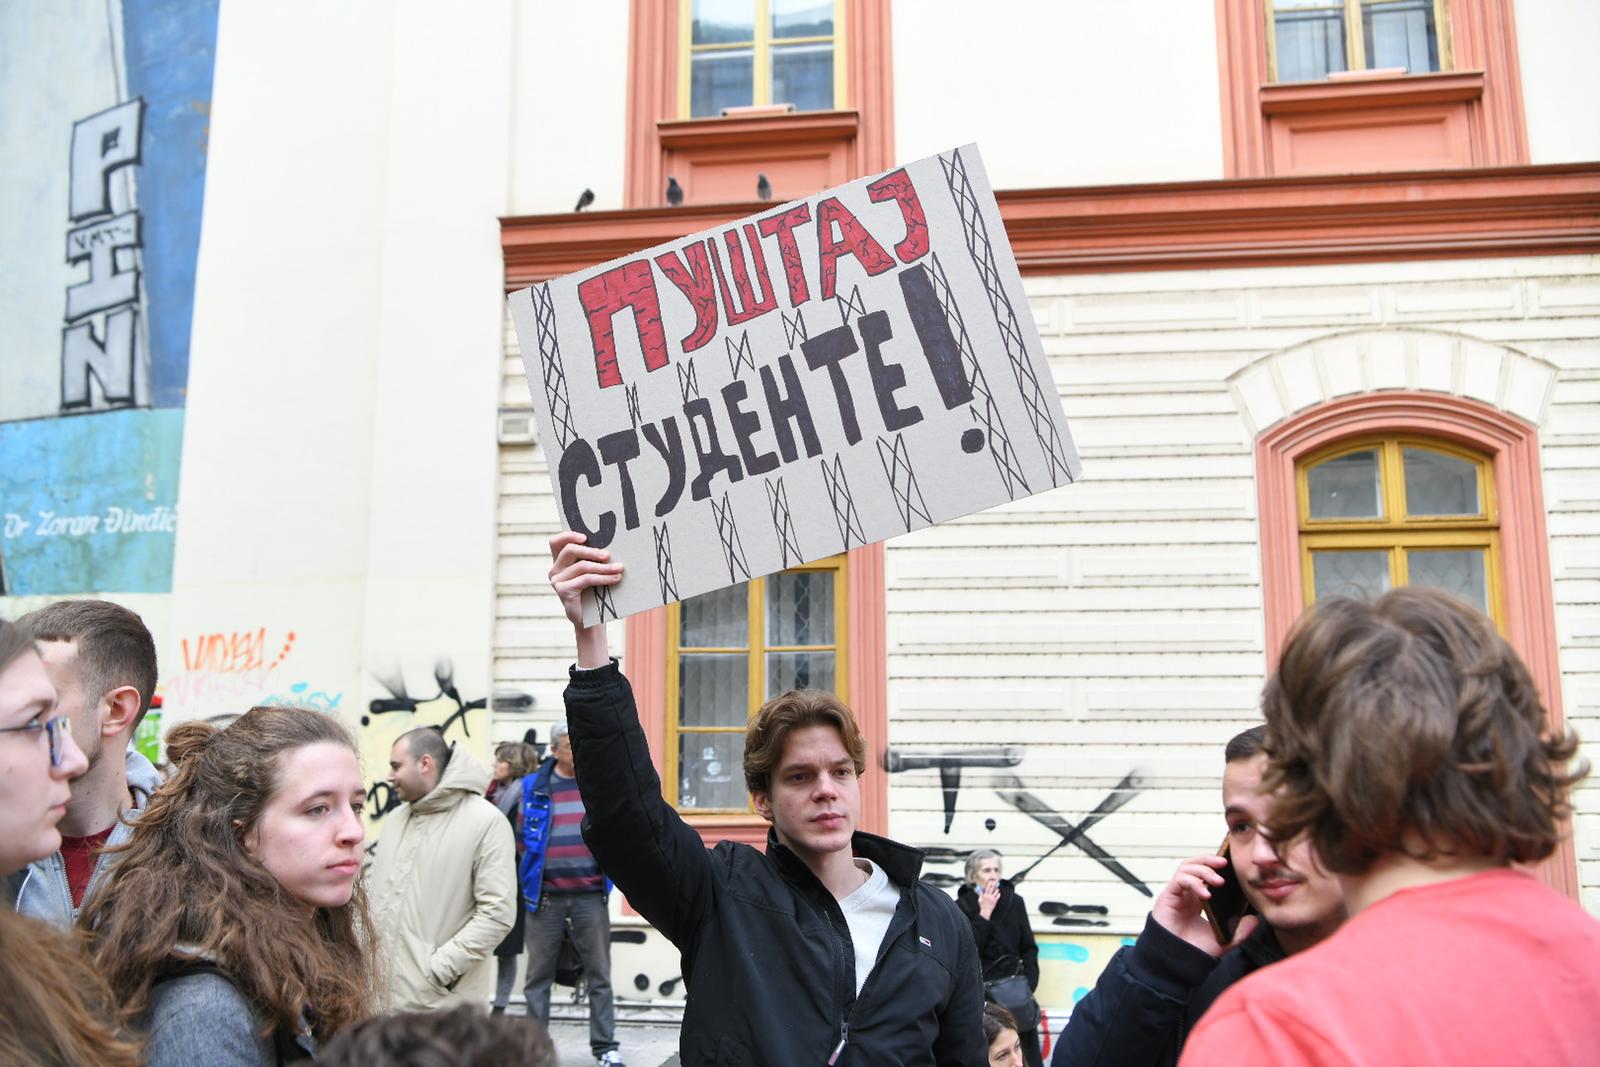 27, December, 2023, Belgrade - Students gathered on the Plateau in front of the Faculty of Philosophy, where they announced the radicalization of the protest. Pavle Cicvaric. Photo: A.H./ATAImages

27, decembar, 2023, Beograd - Studenti su se okupili na Platou ispred Filozofskog fakulteta gde su najavili radikalizaciju protesta. Photo: A.H./ATAImages Photo: A.H./ATAImages/PIXSELL